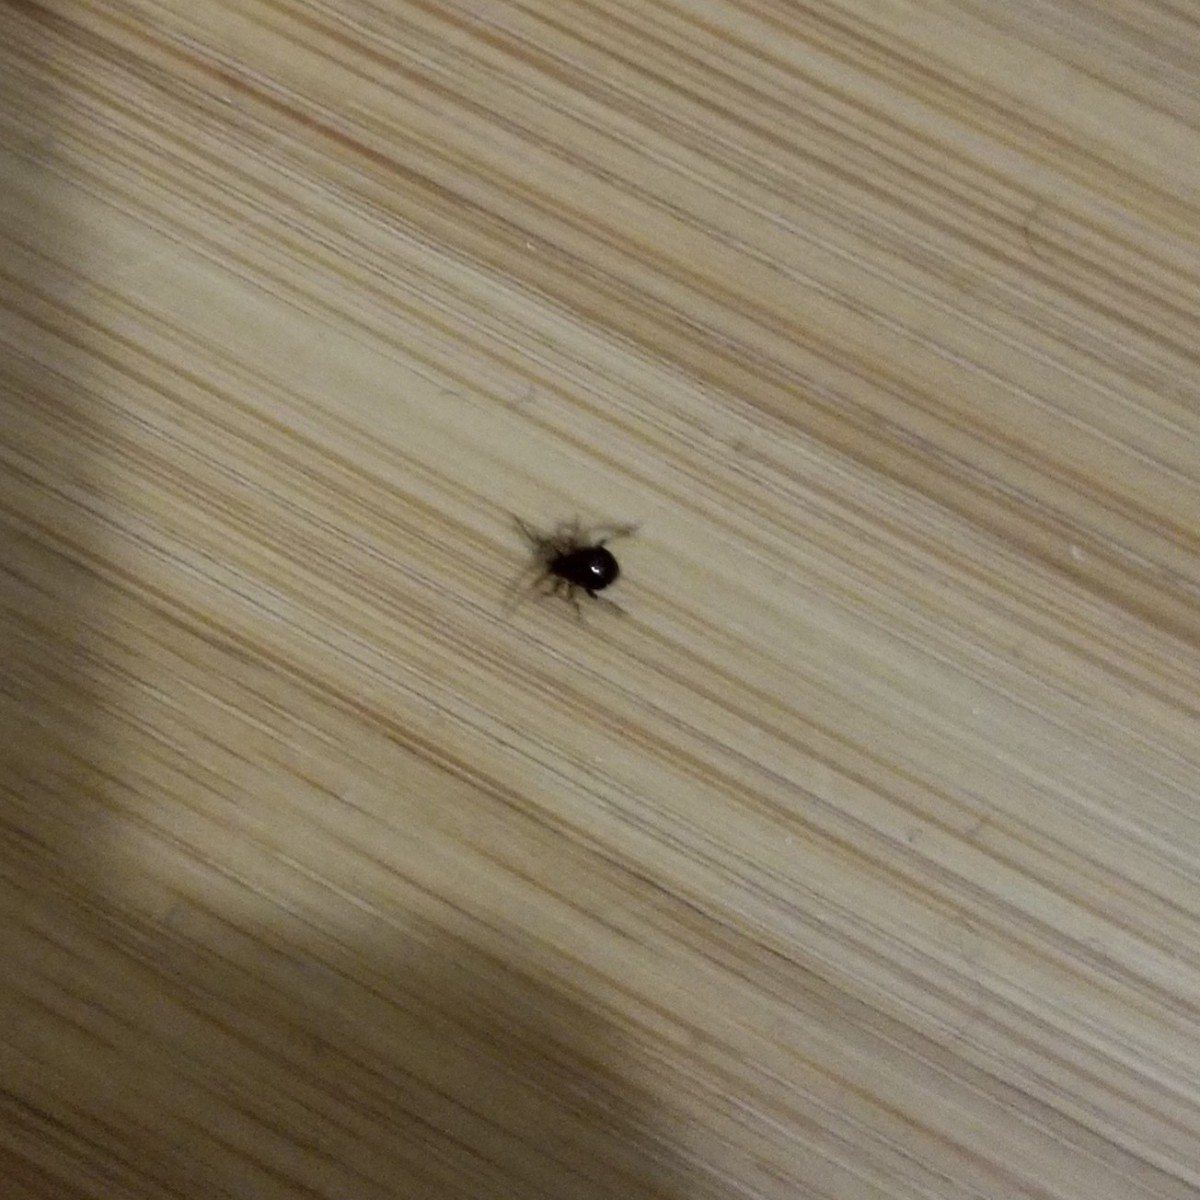 identifying-small-black-bugs-in-an-old-house-thriftyfun